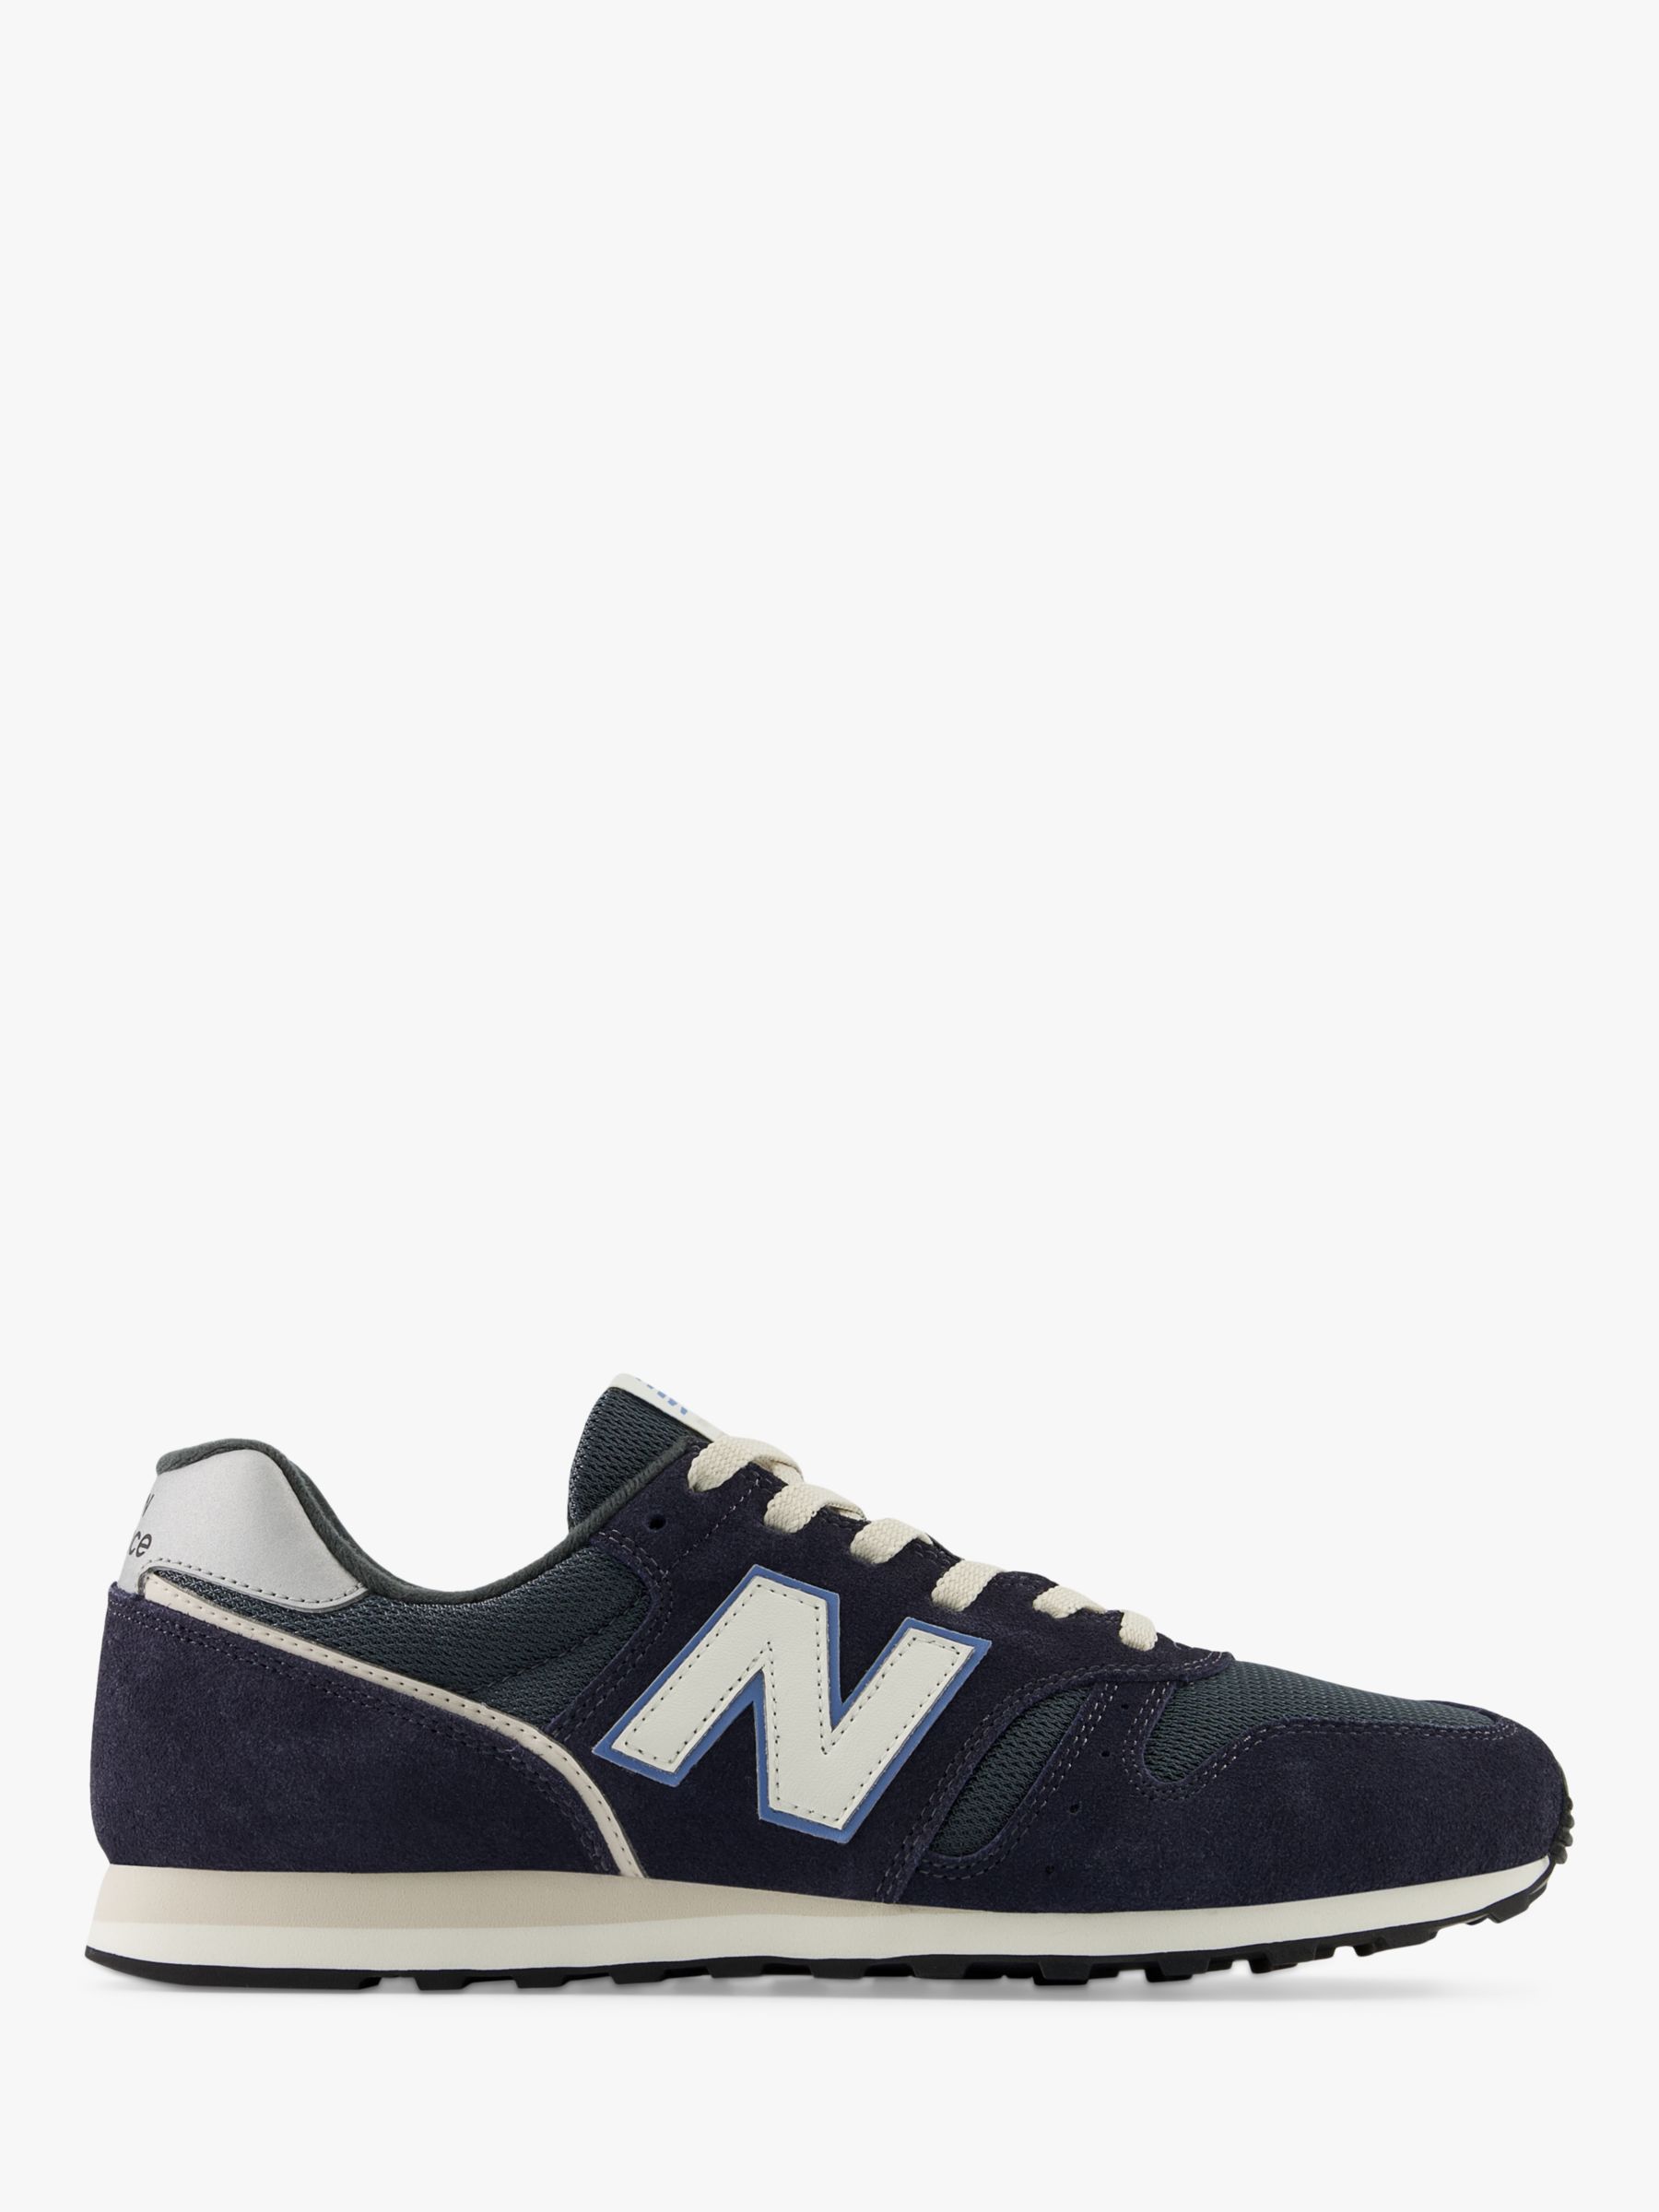 New Balance 373v2 Suede Trainers, Navy at John Lewis & Partners